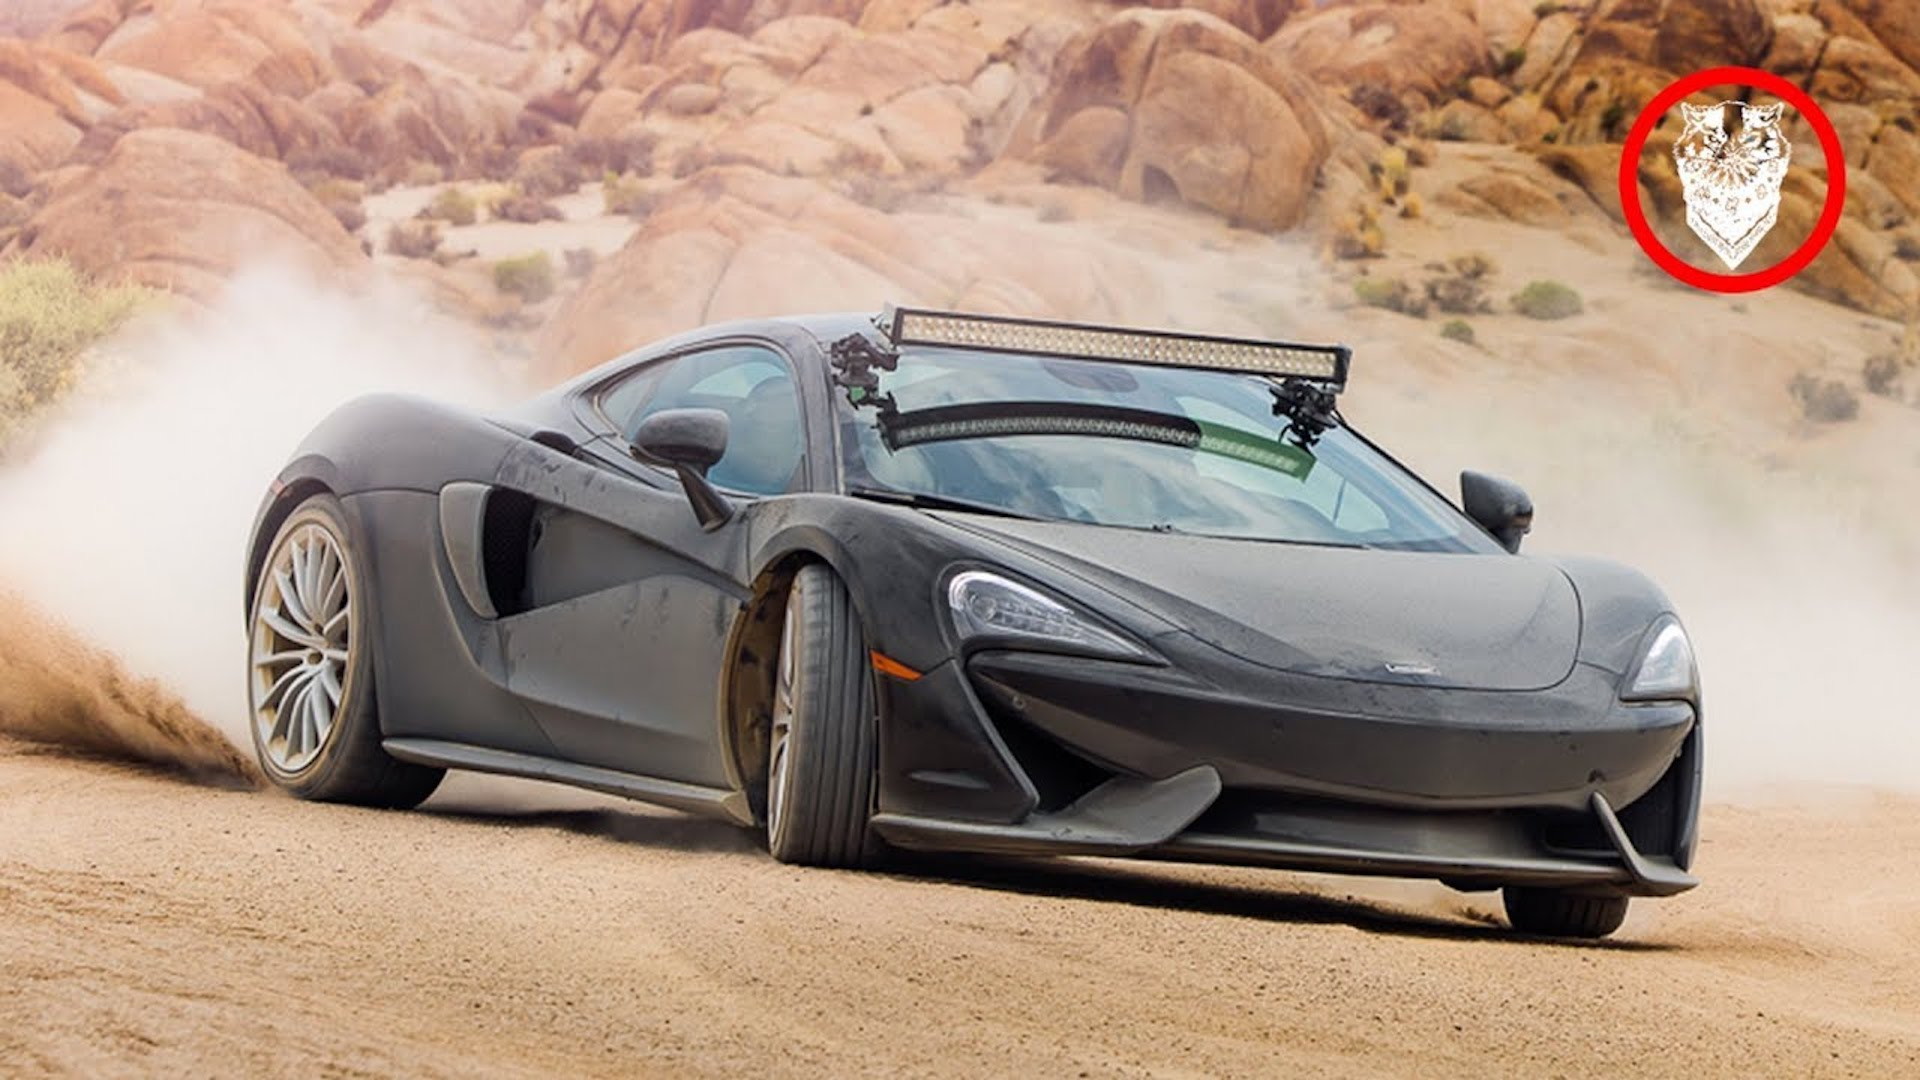 This is what it's like to take a McLaren 570GT off road